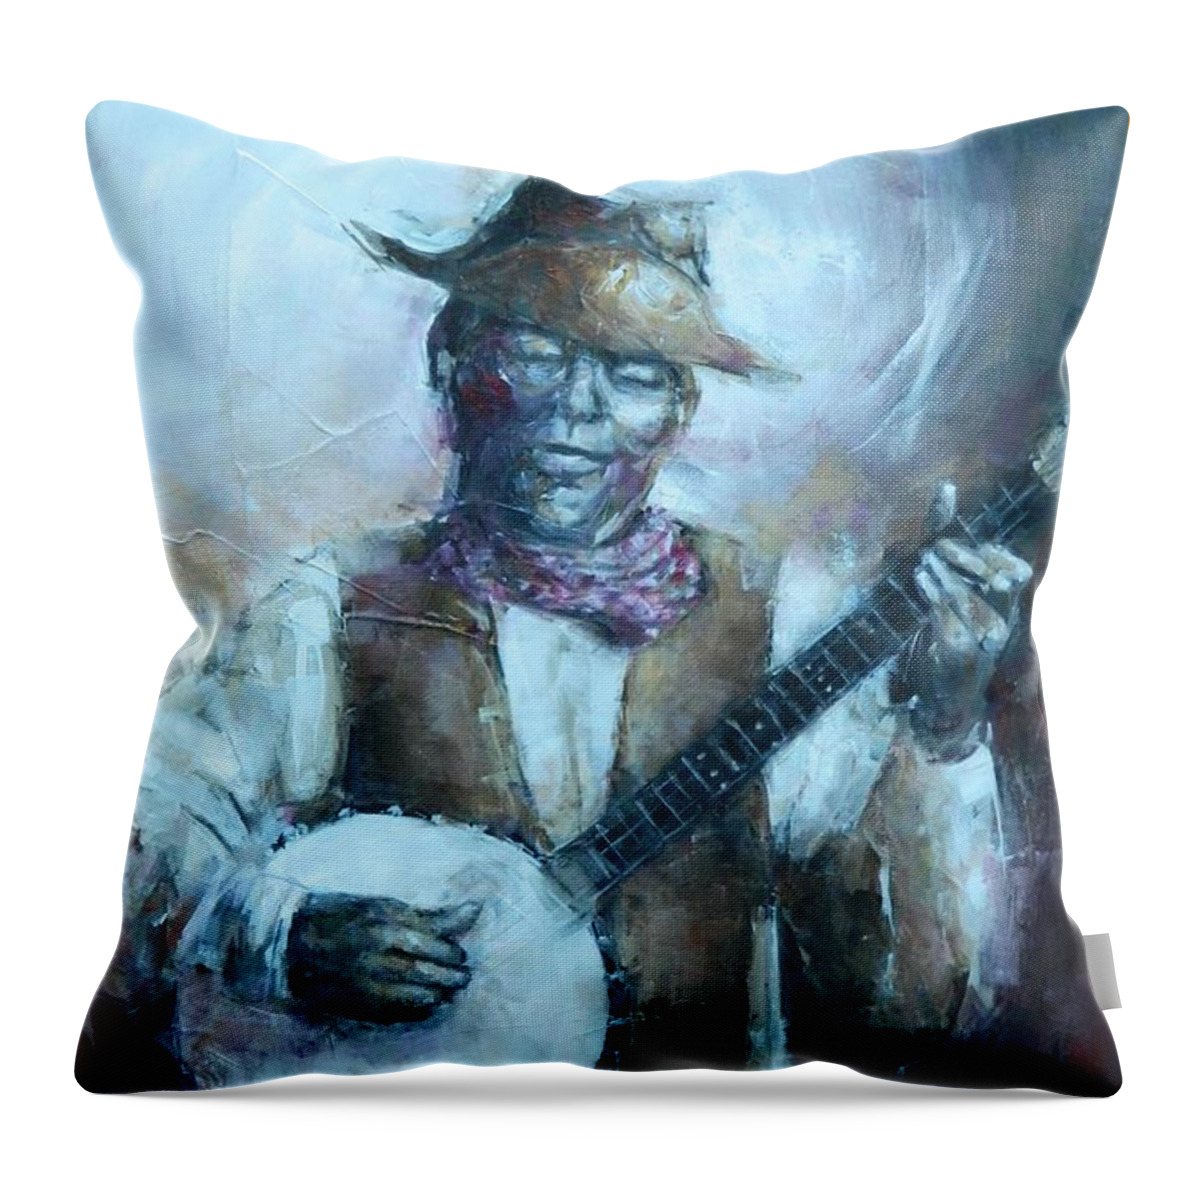 Banjo Throw Pillow featuring the painting Cotton Eye Joe by Dan Campbell